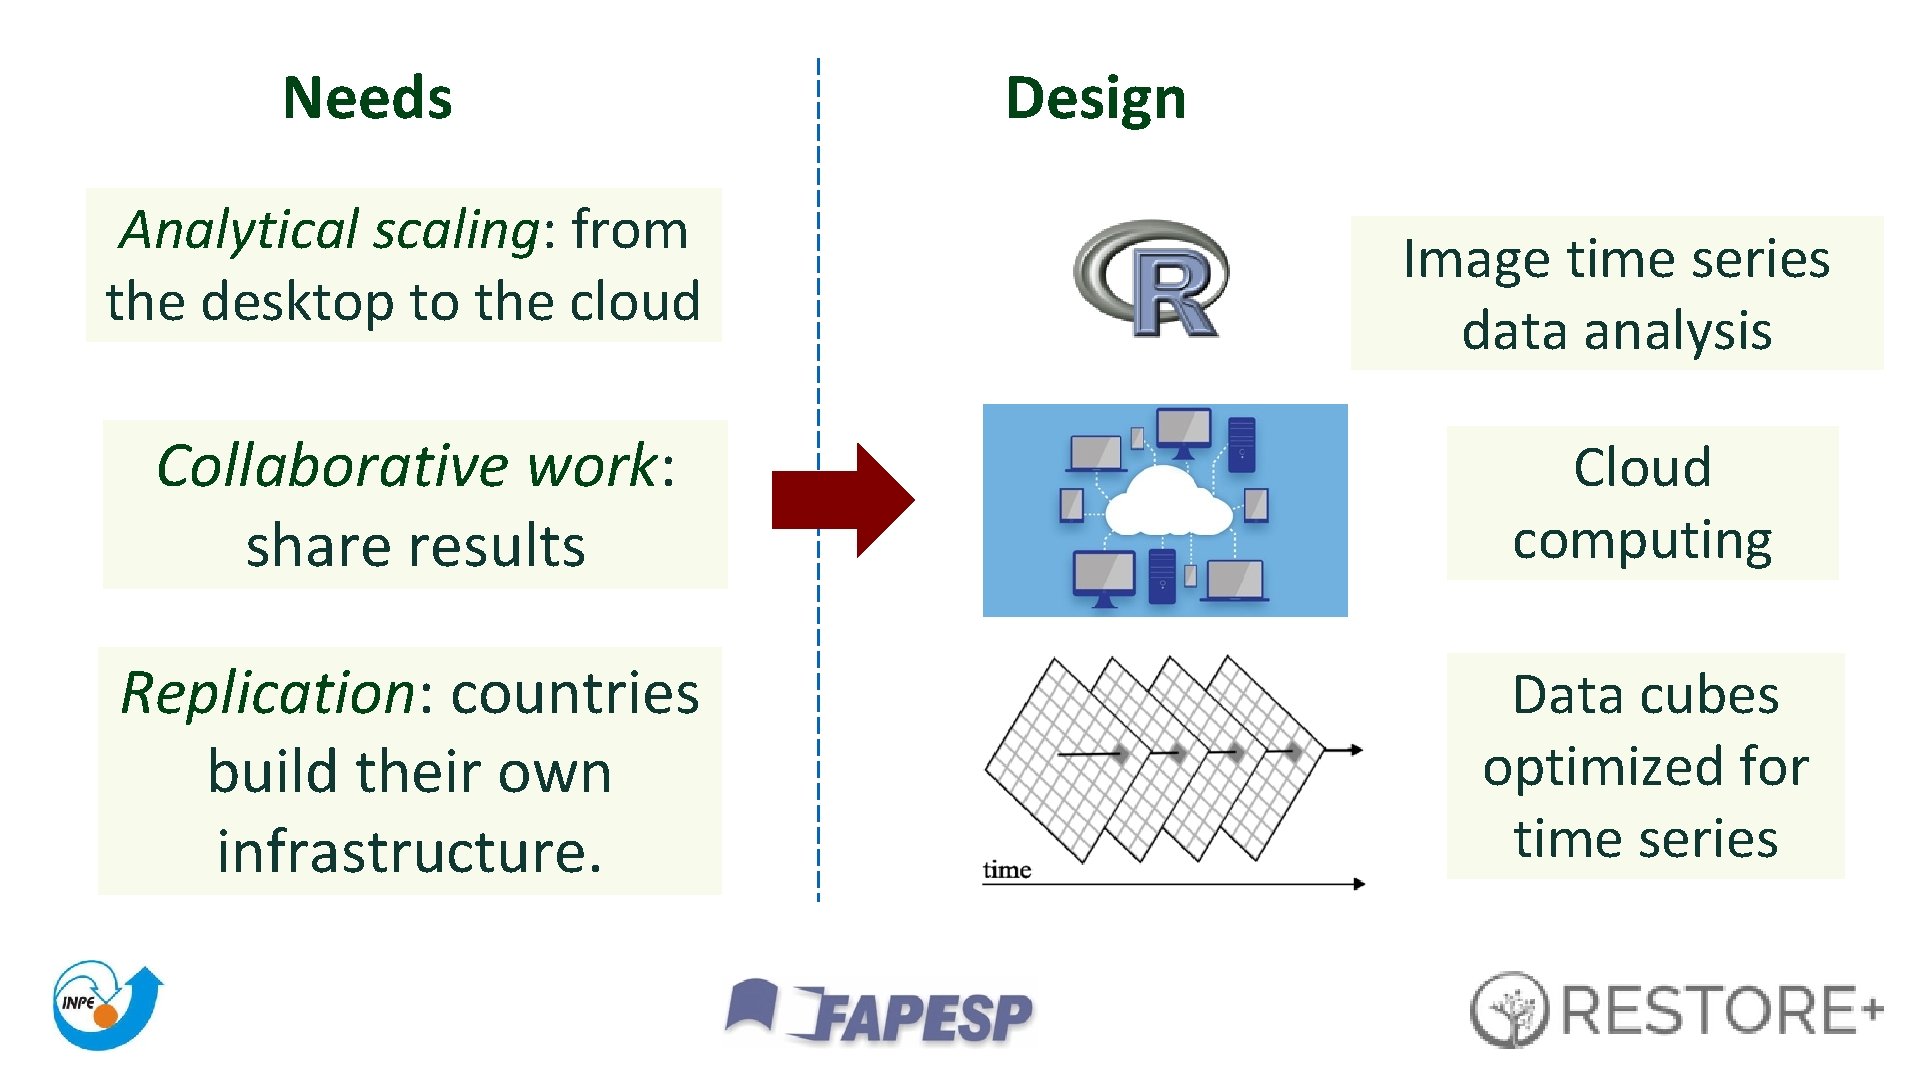 Needs Analytical scaling: from the desktop to the cloud Design Image time series data